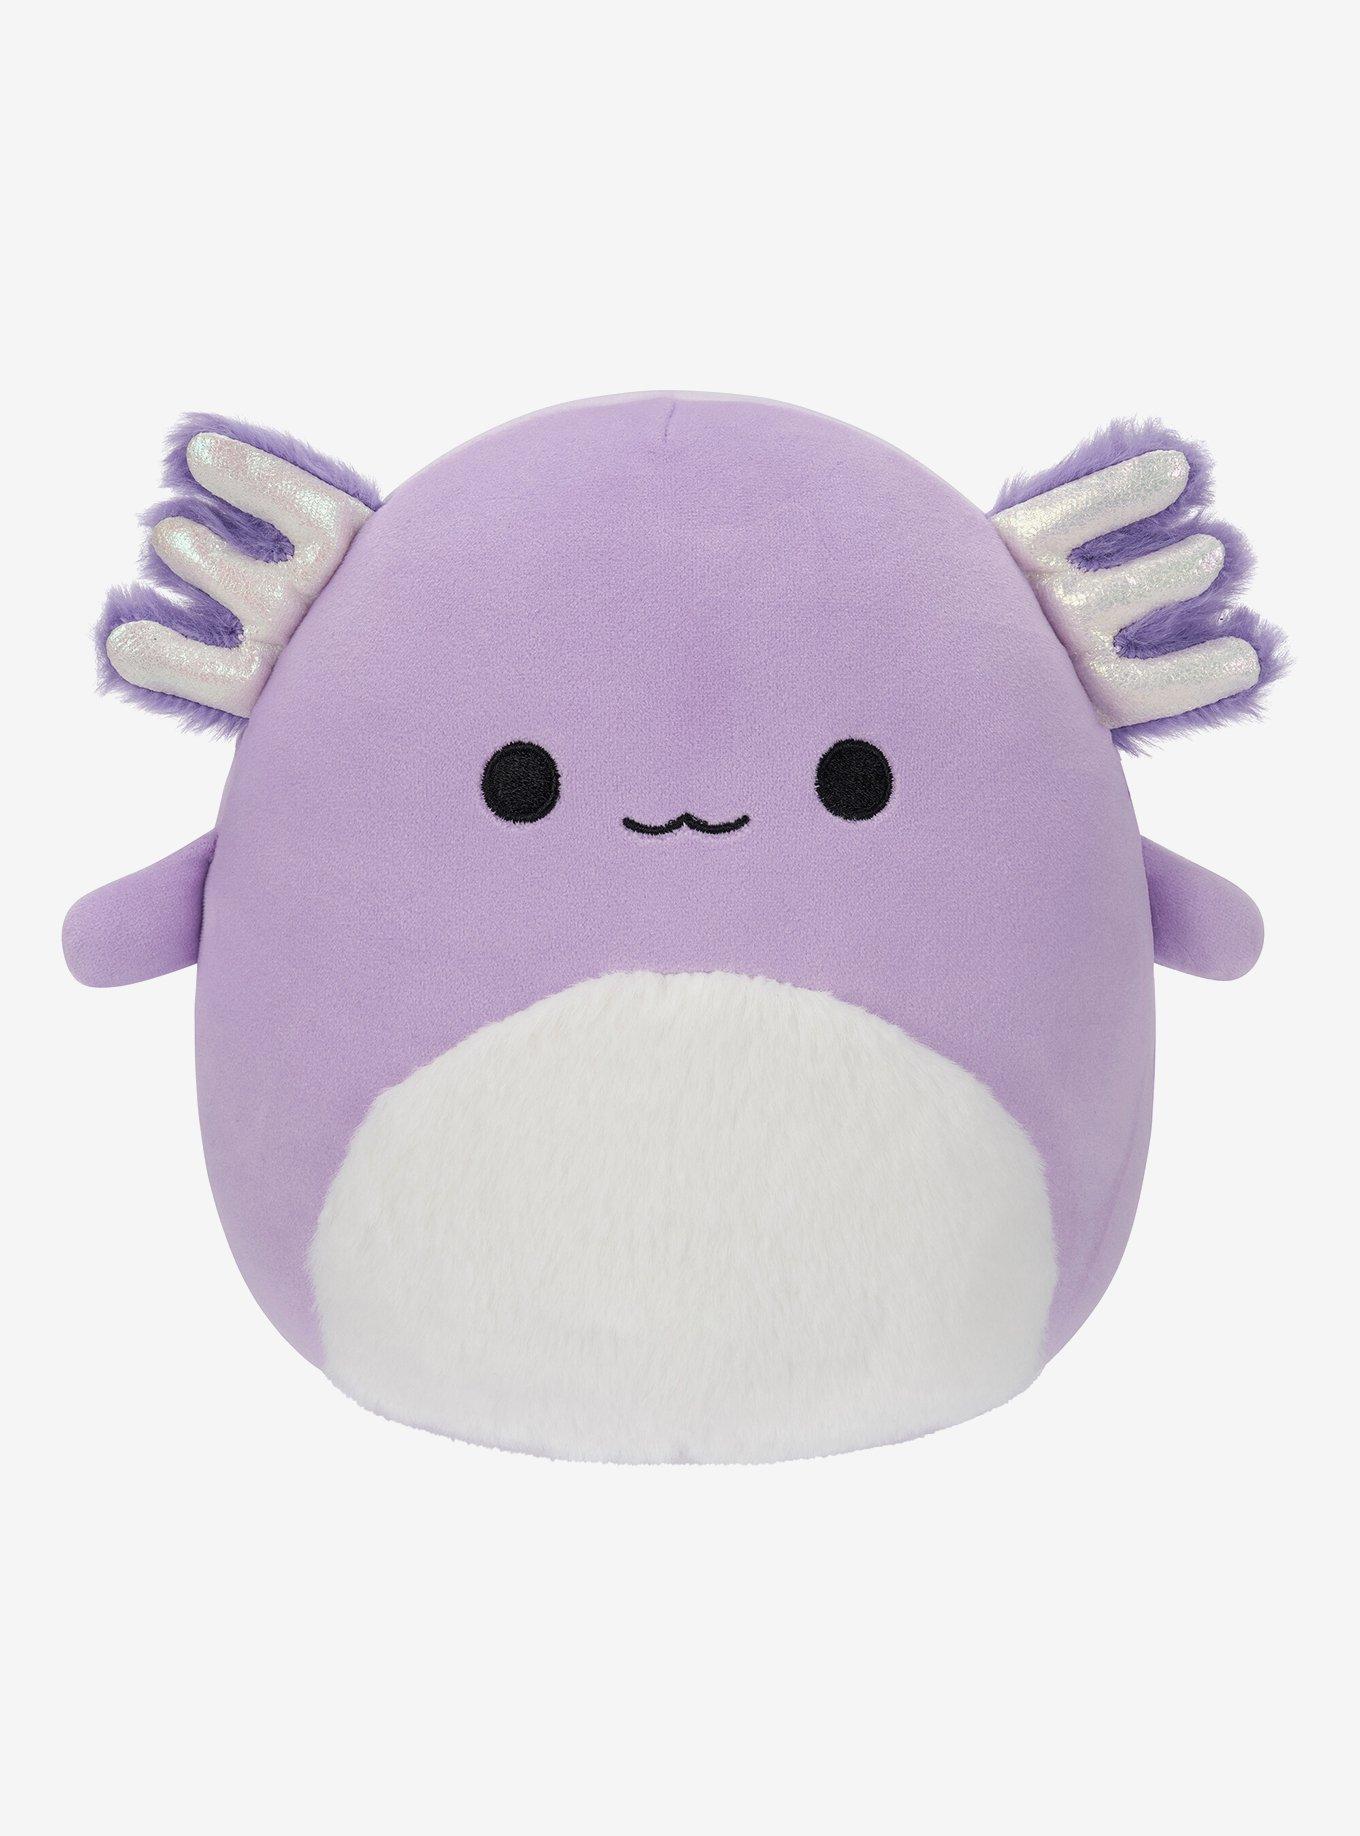 Squishmallows Everyday Series 2 Assorted Blind Plush